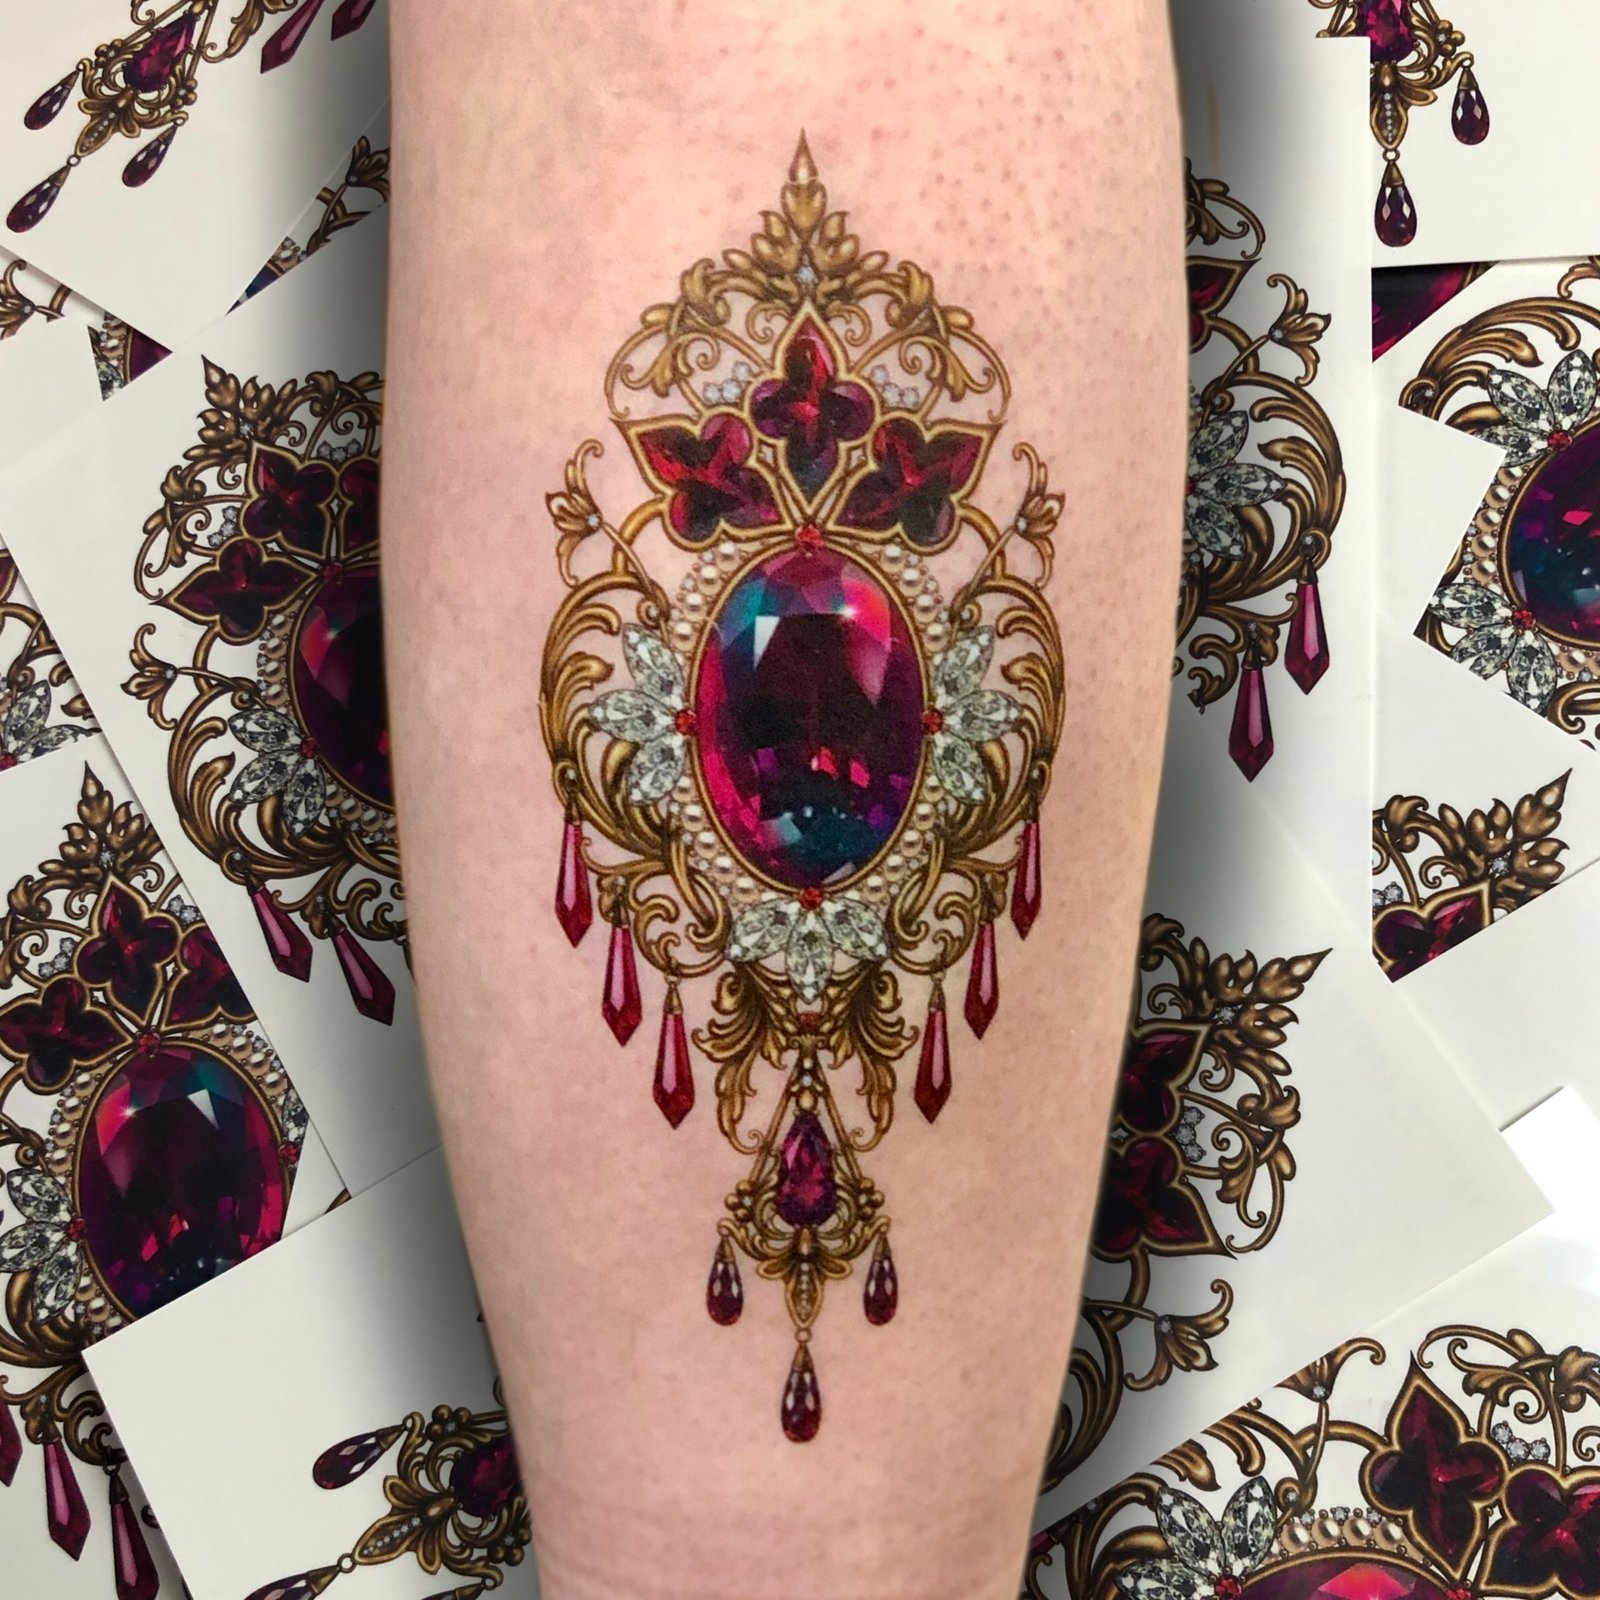 23 People Who Love Jewelry So Much That They Tattooed Glittering Gemstones  on Their Skin